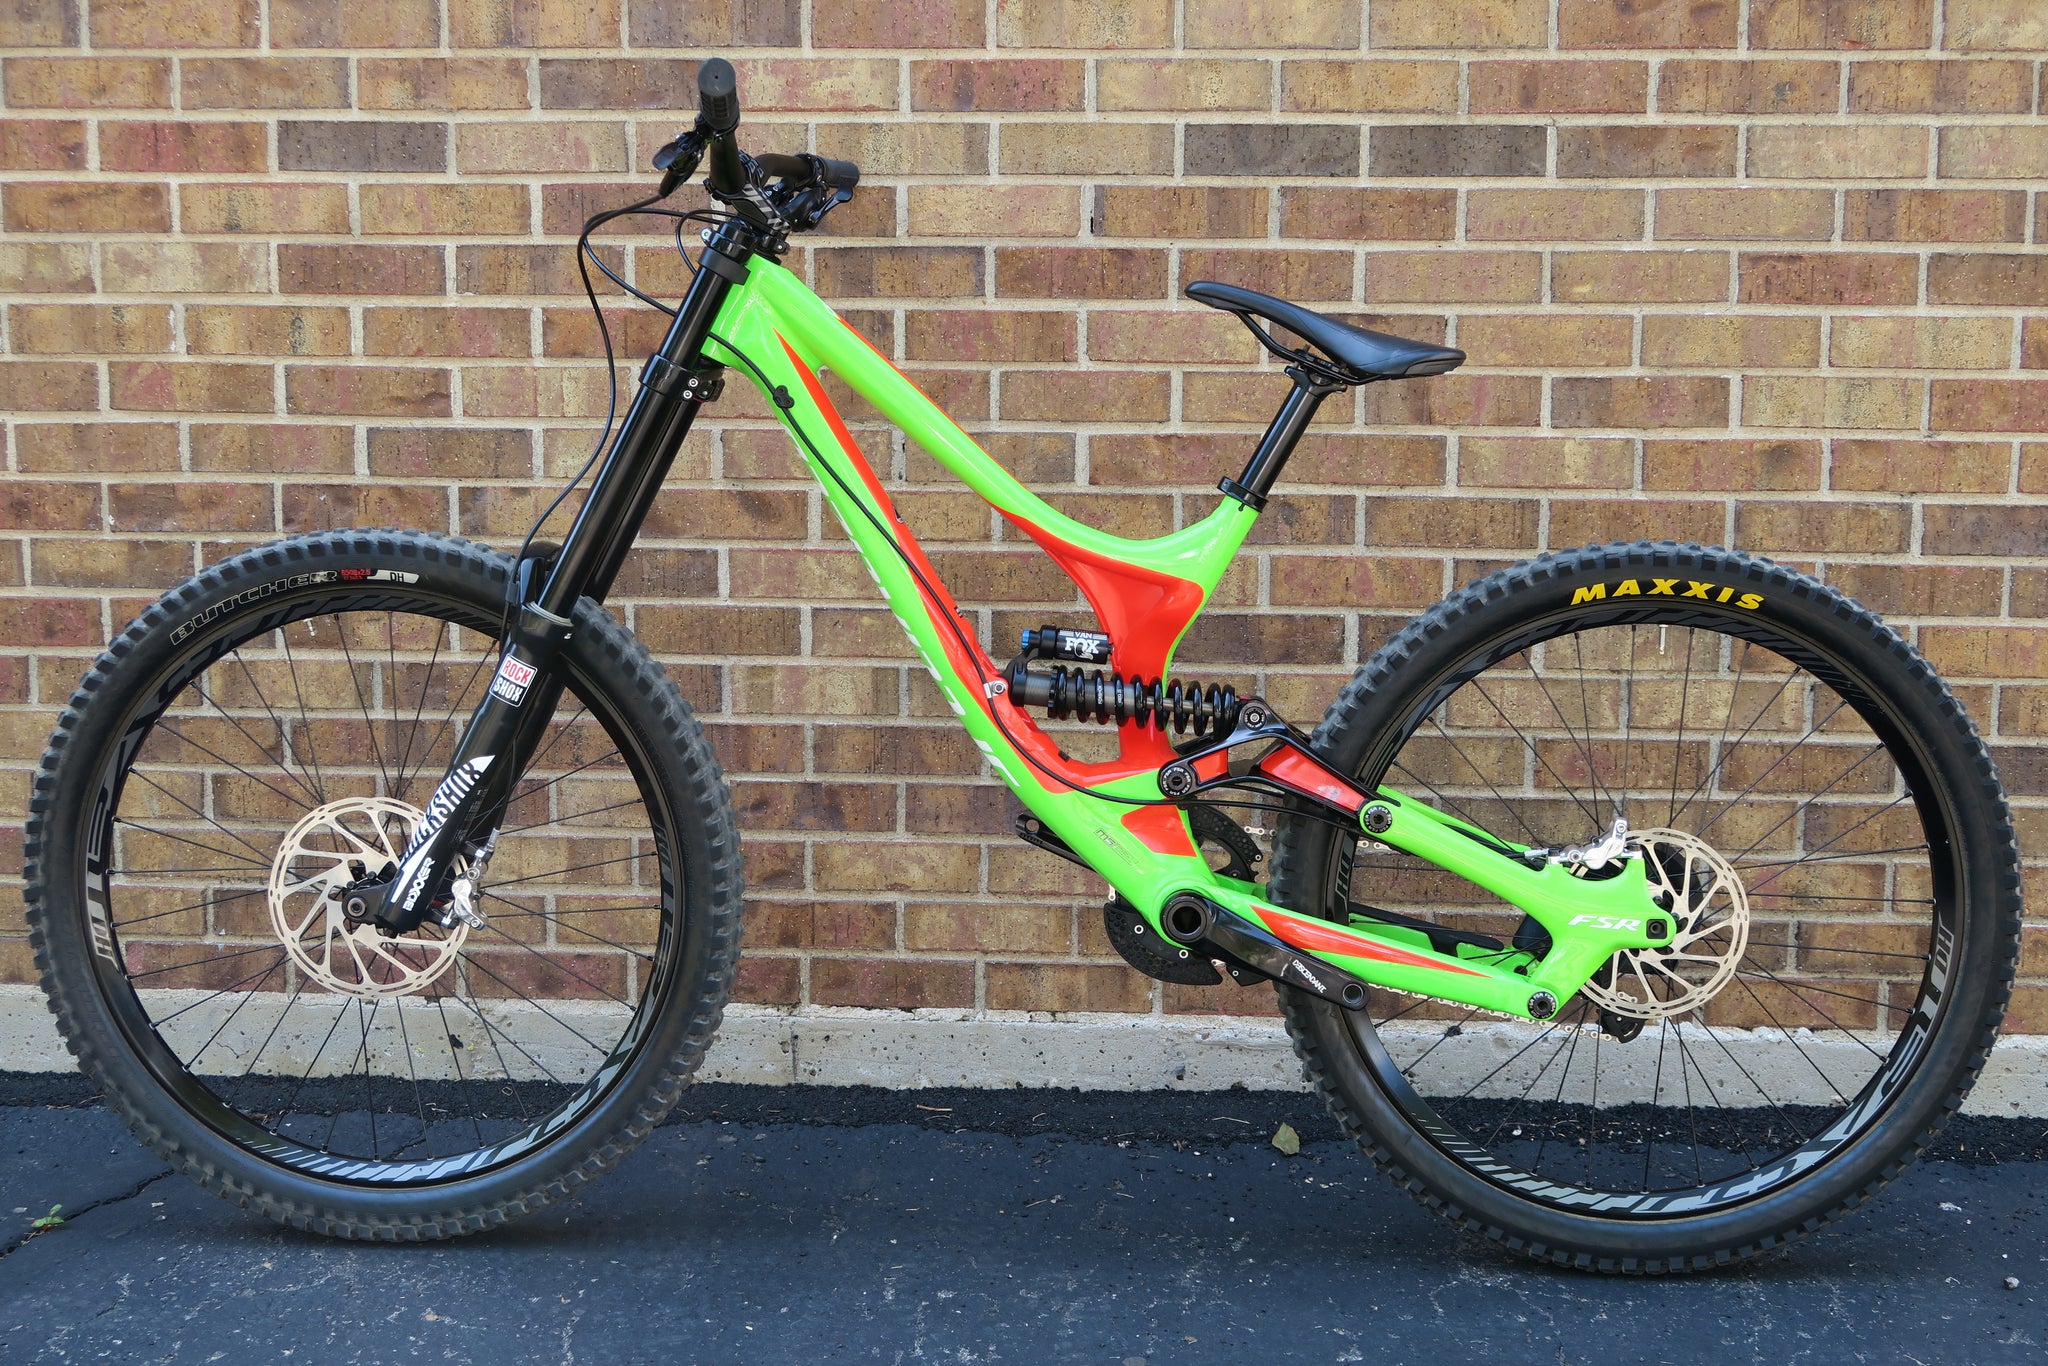 2017 SPECIALIZED DEMO 8 l ALLOY 27.5"